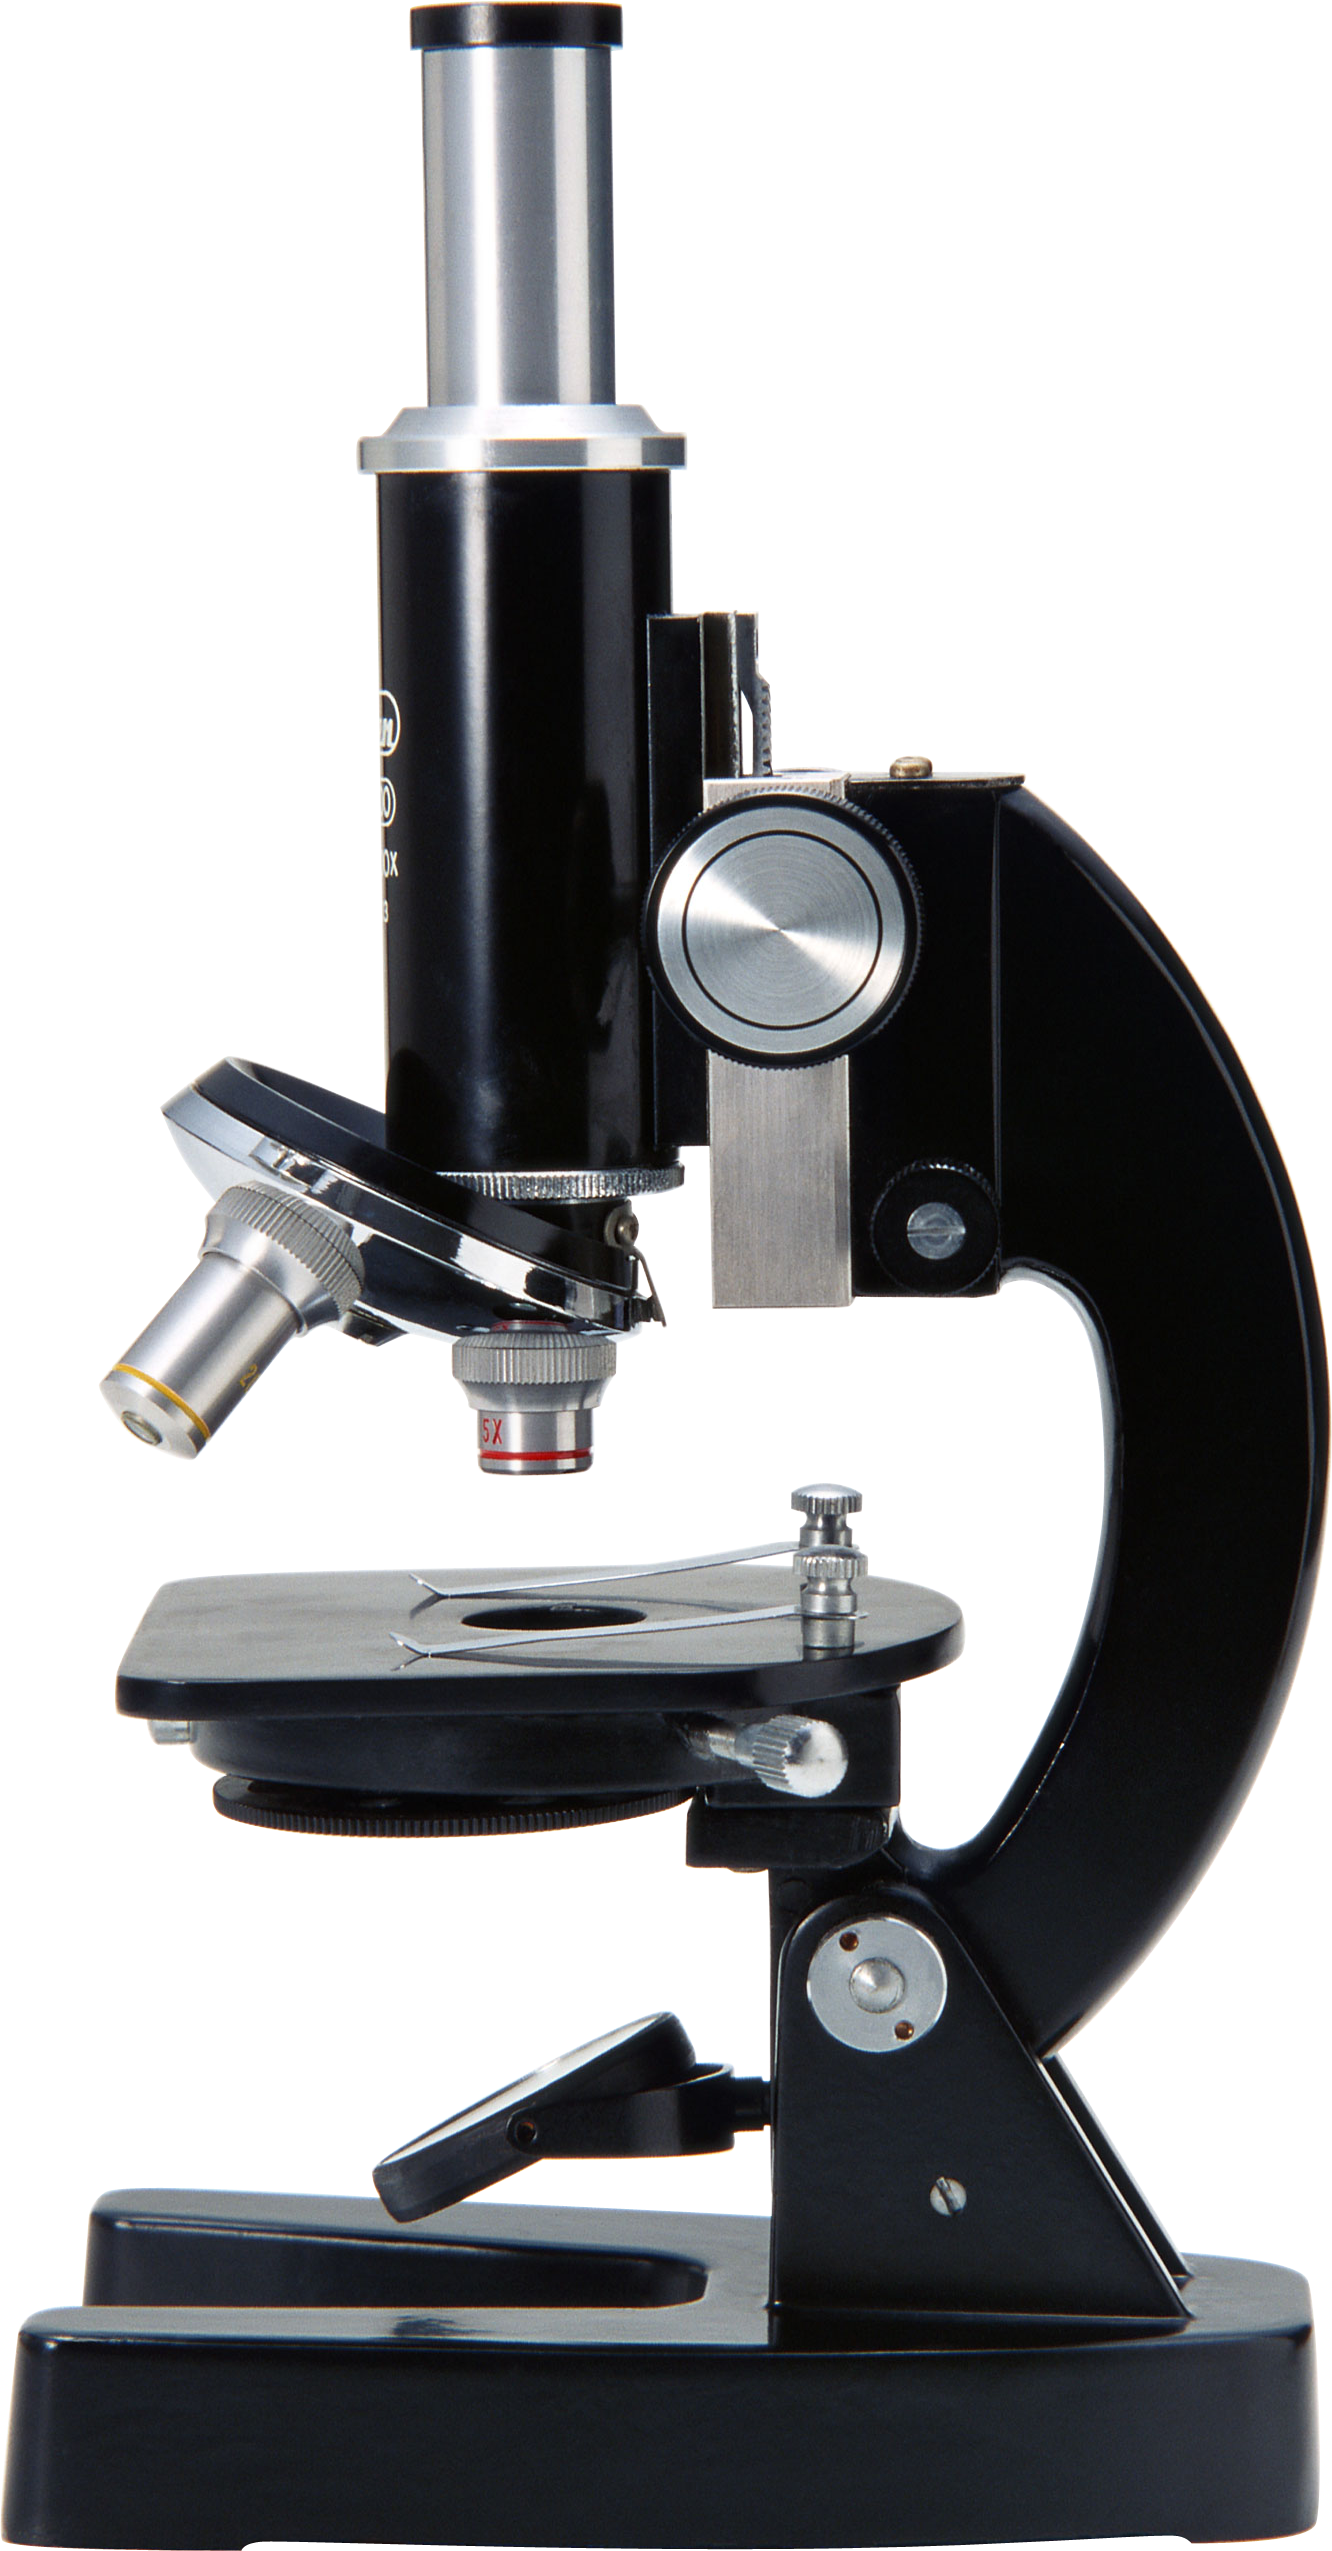 Microscope PNG Image